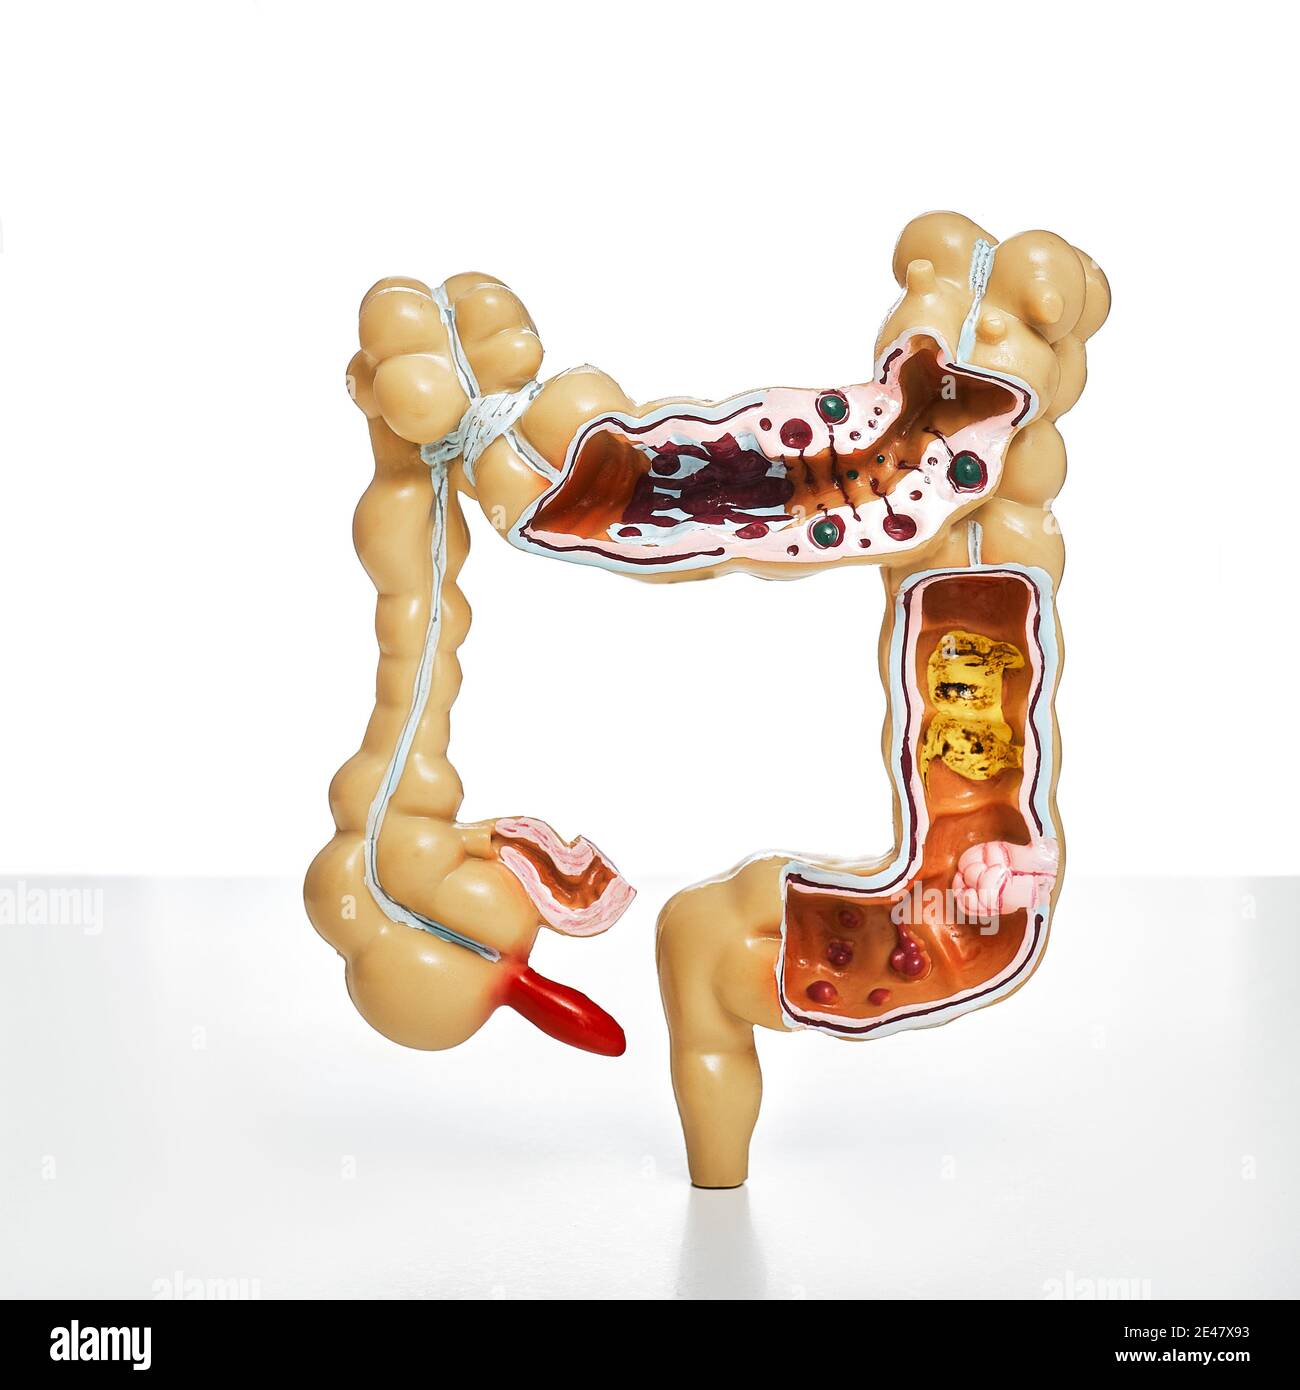 Colon model with pathologies, and different diseases, close-up for medical and biological education Stock Photo